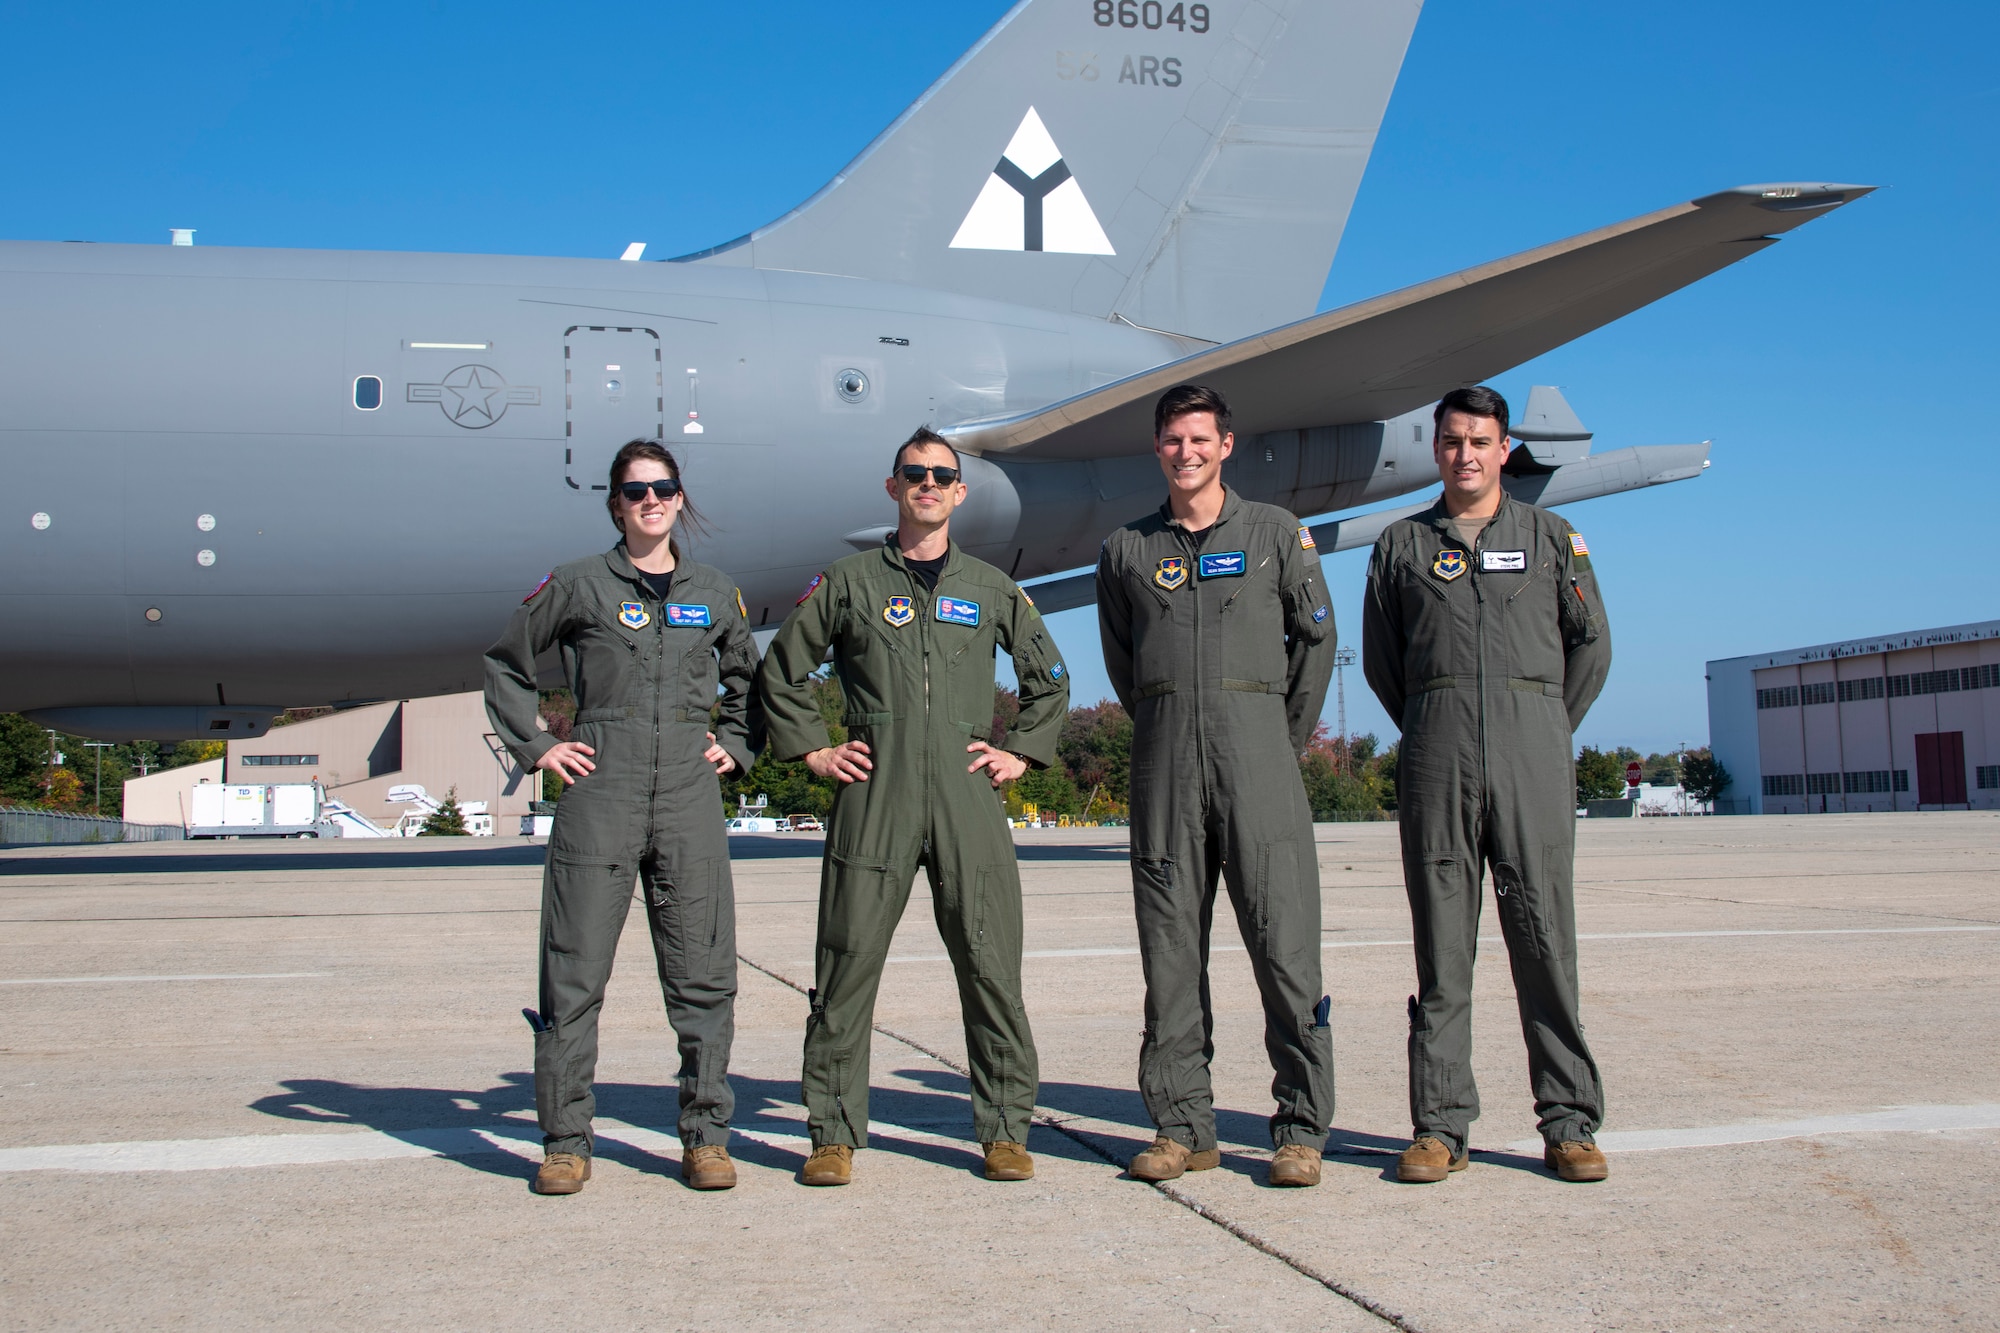 U.S. Air Force aircrew of the KC-46 Pegasus flyover team for the funeral of U.S. Army Air Forces Lt. Earnest Vienneau, 97th Bombardment Group (BW), stands next to their aircraft at Pease Air National Guard Base, New Hampshire, Oct. 8, 2021. Over time, the 97th BW  became the 97th Air Mobility Wing that these Airmen are members of. (U.S. Air Force photo by Staff Sgt. Cody Dowell)